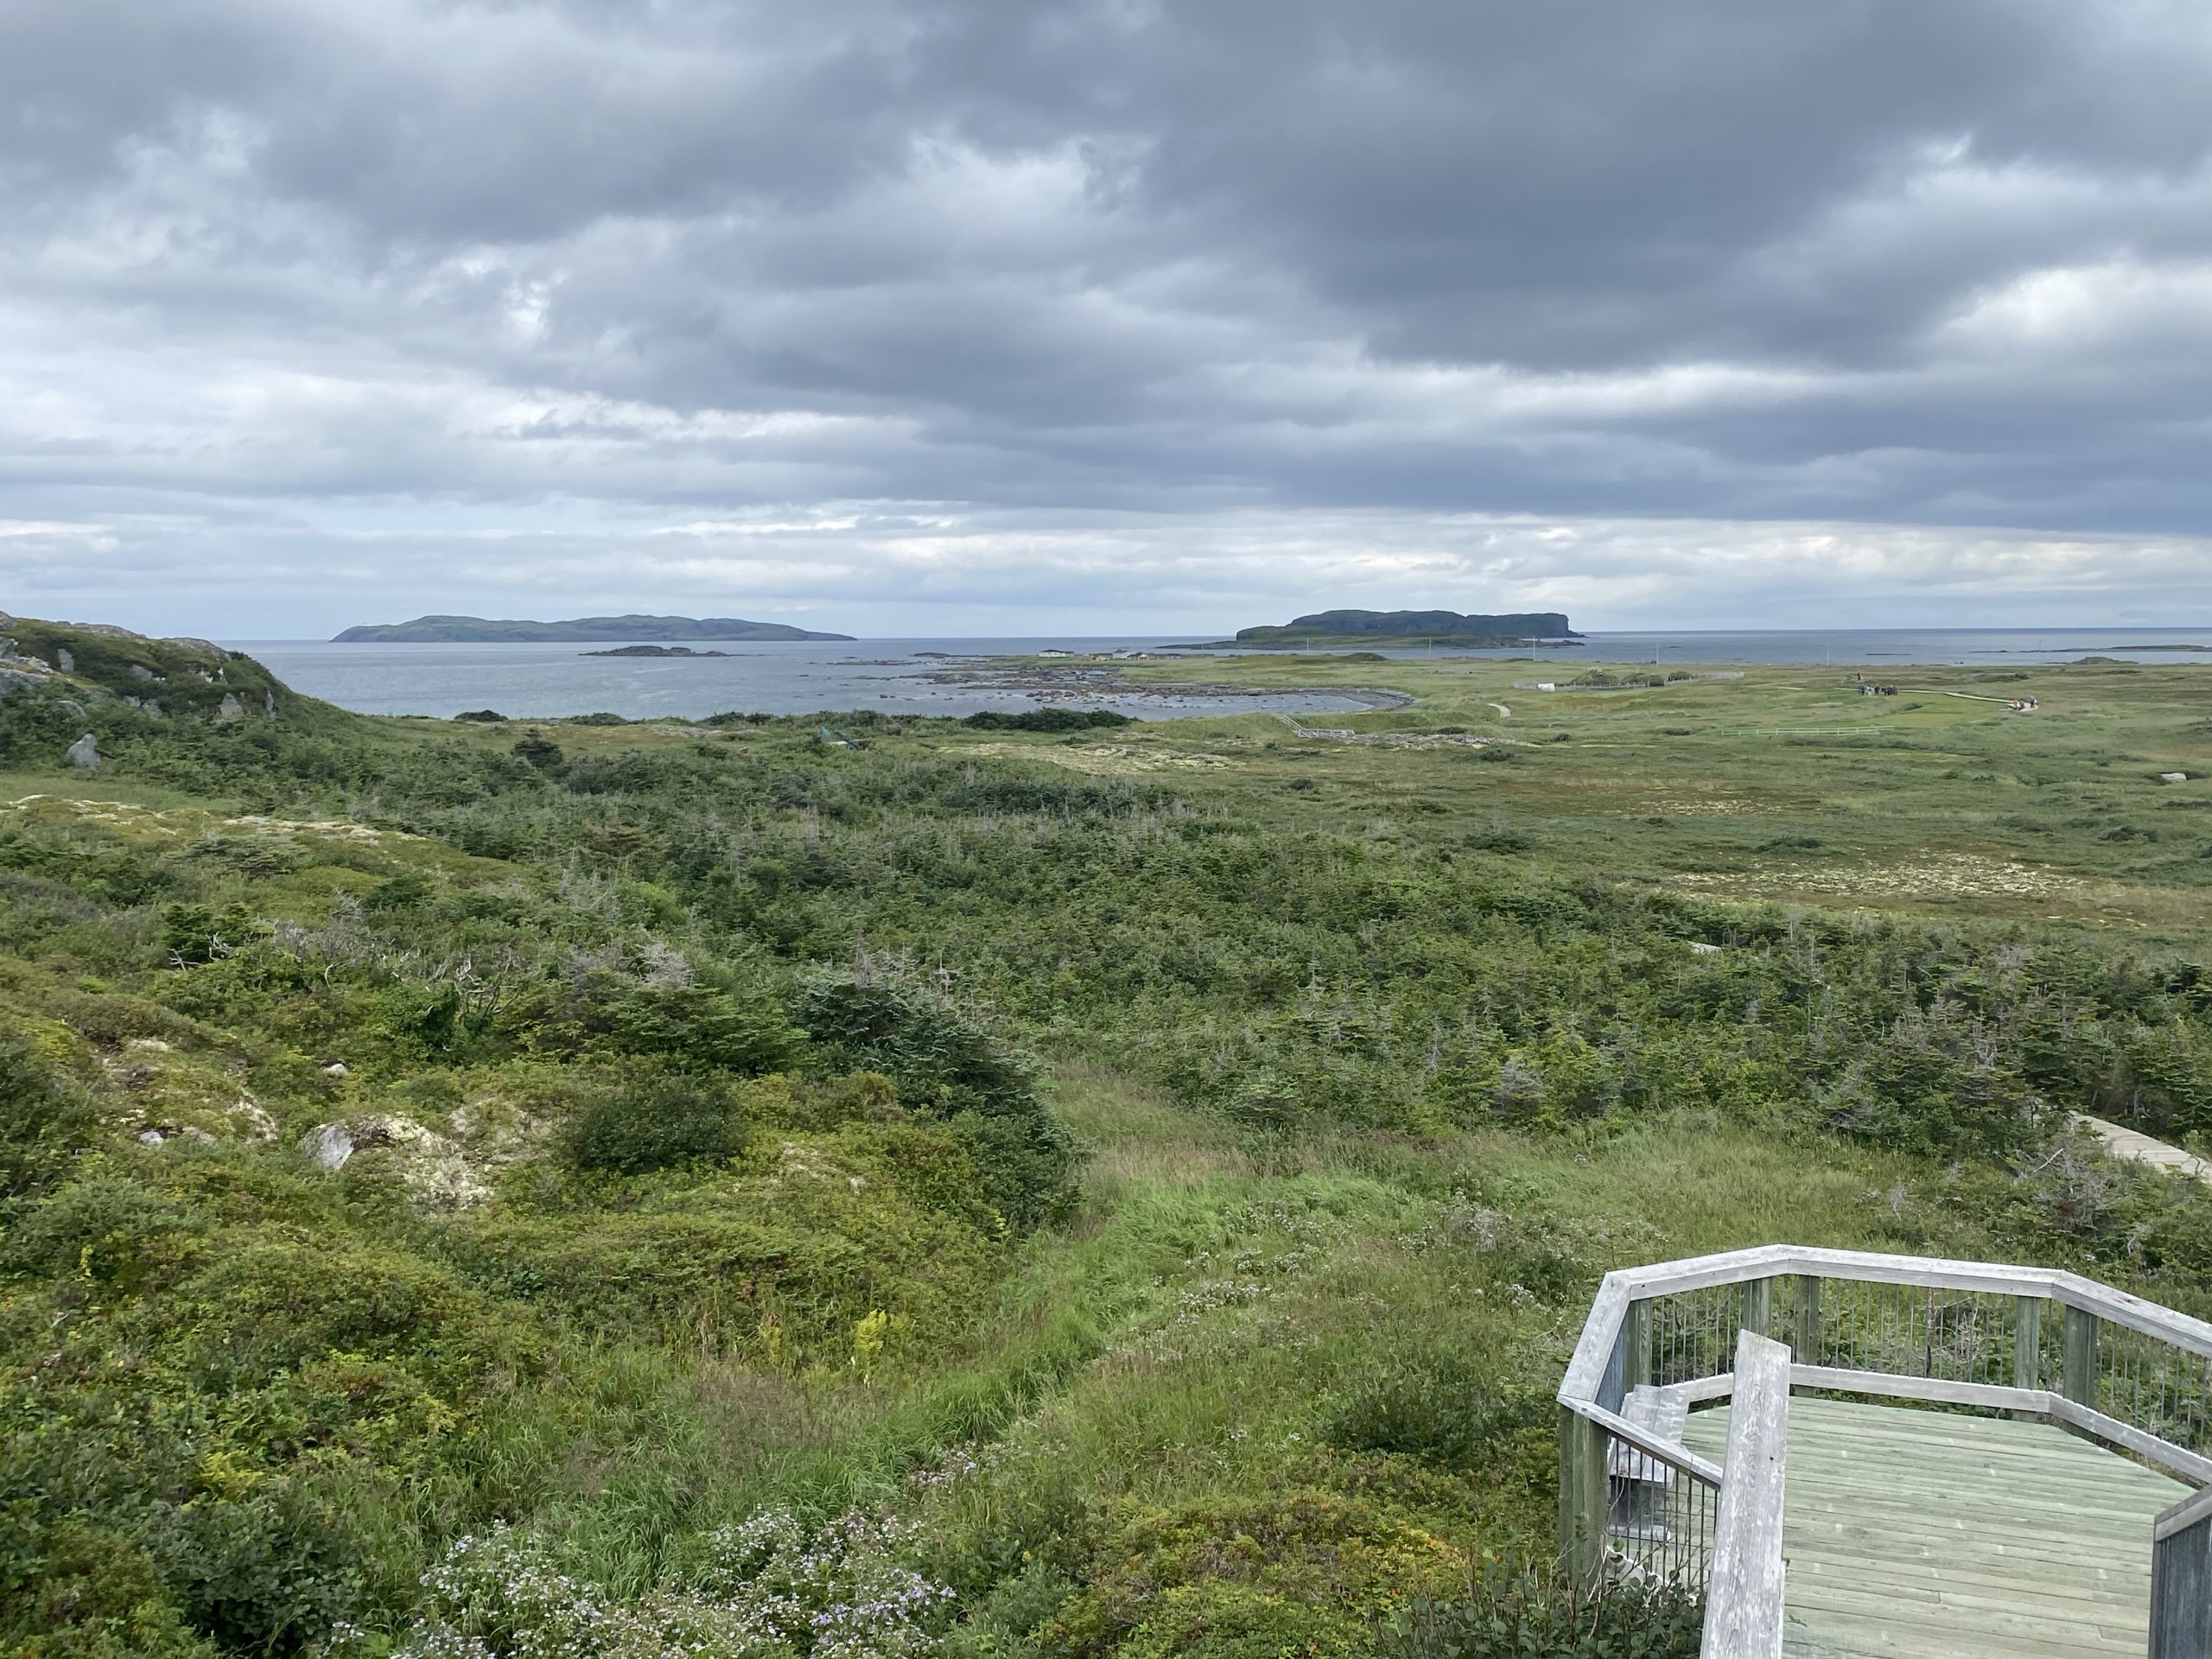 The area around the L’Anse aux Meadows site.